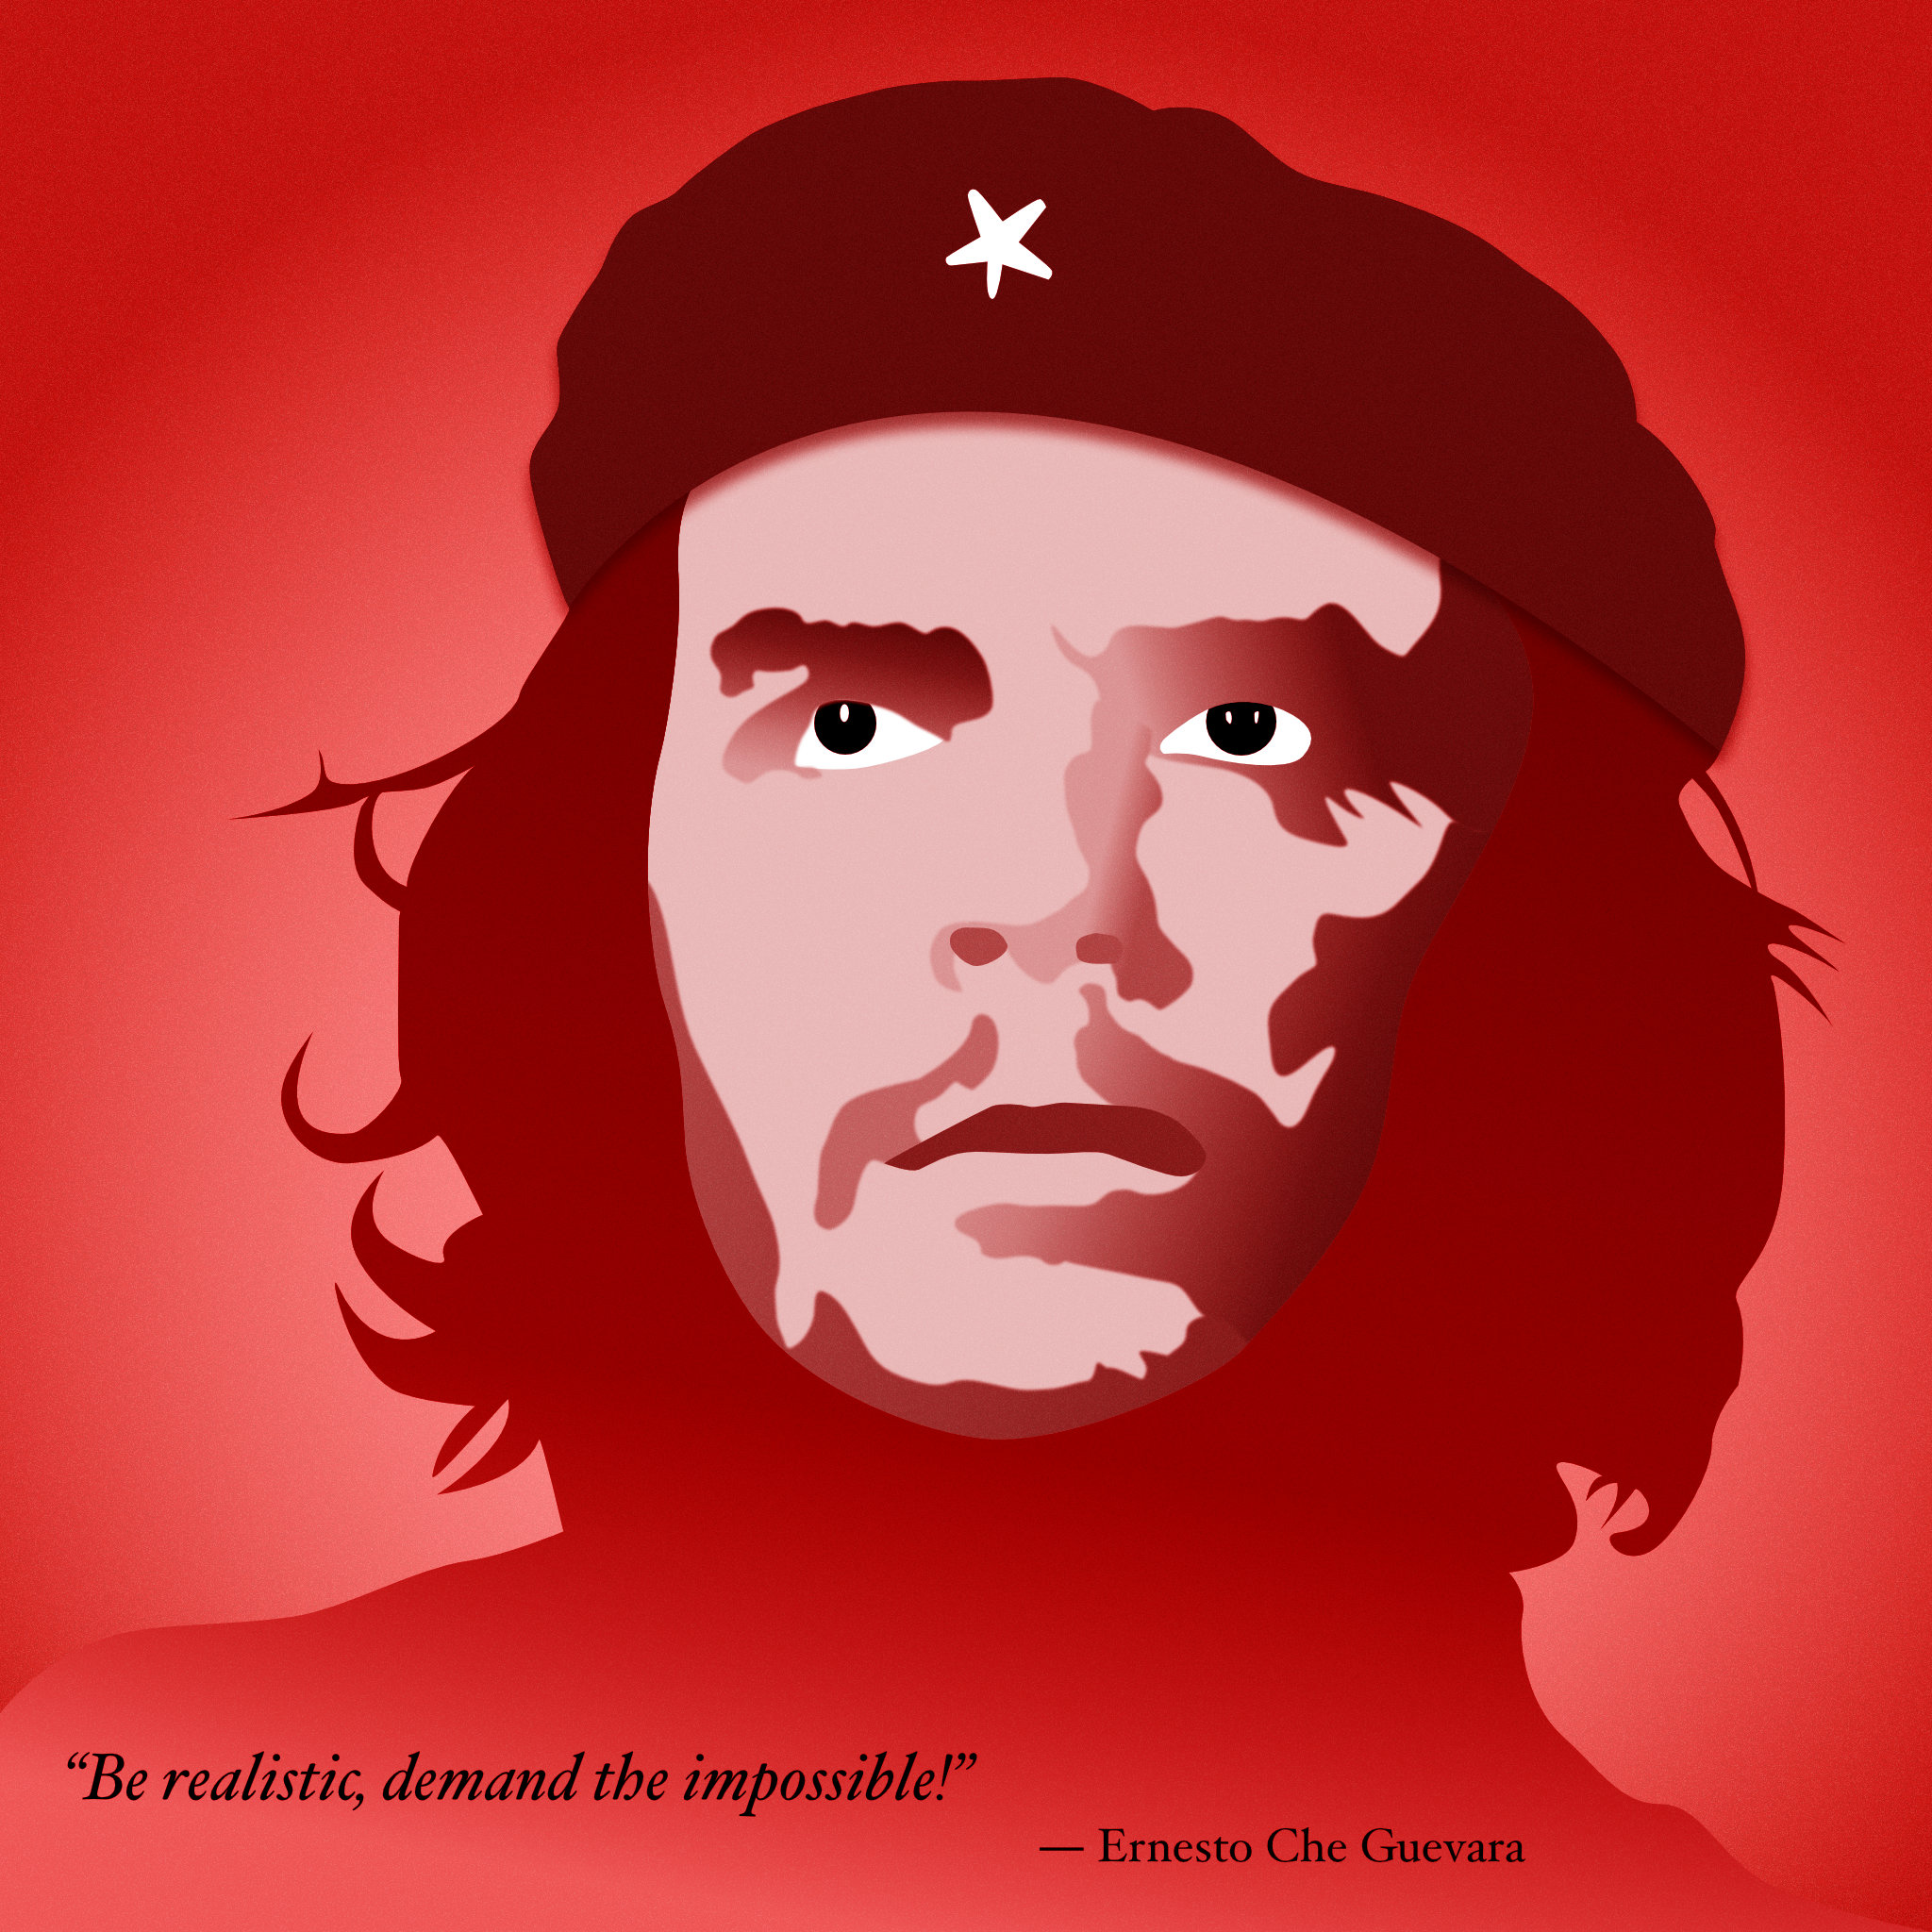 Vector portrait of Che Guevara, in red tones. Based on the iconic photo by Fidel A. Korda.